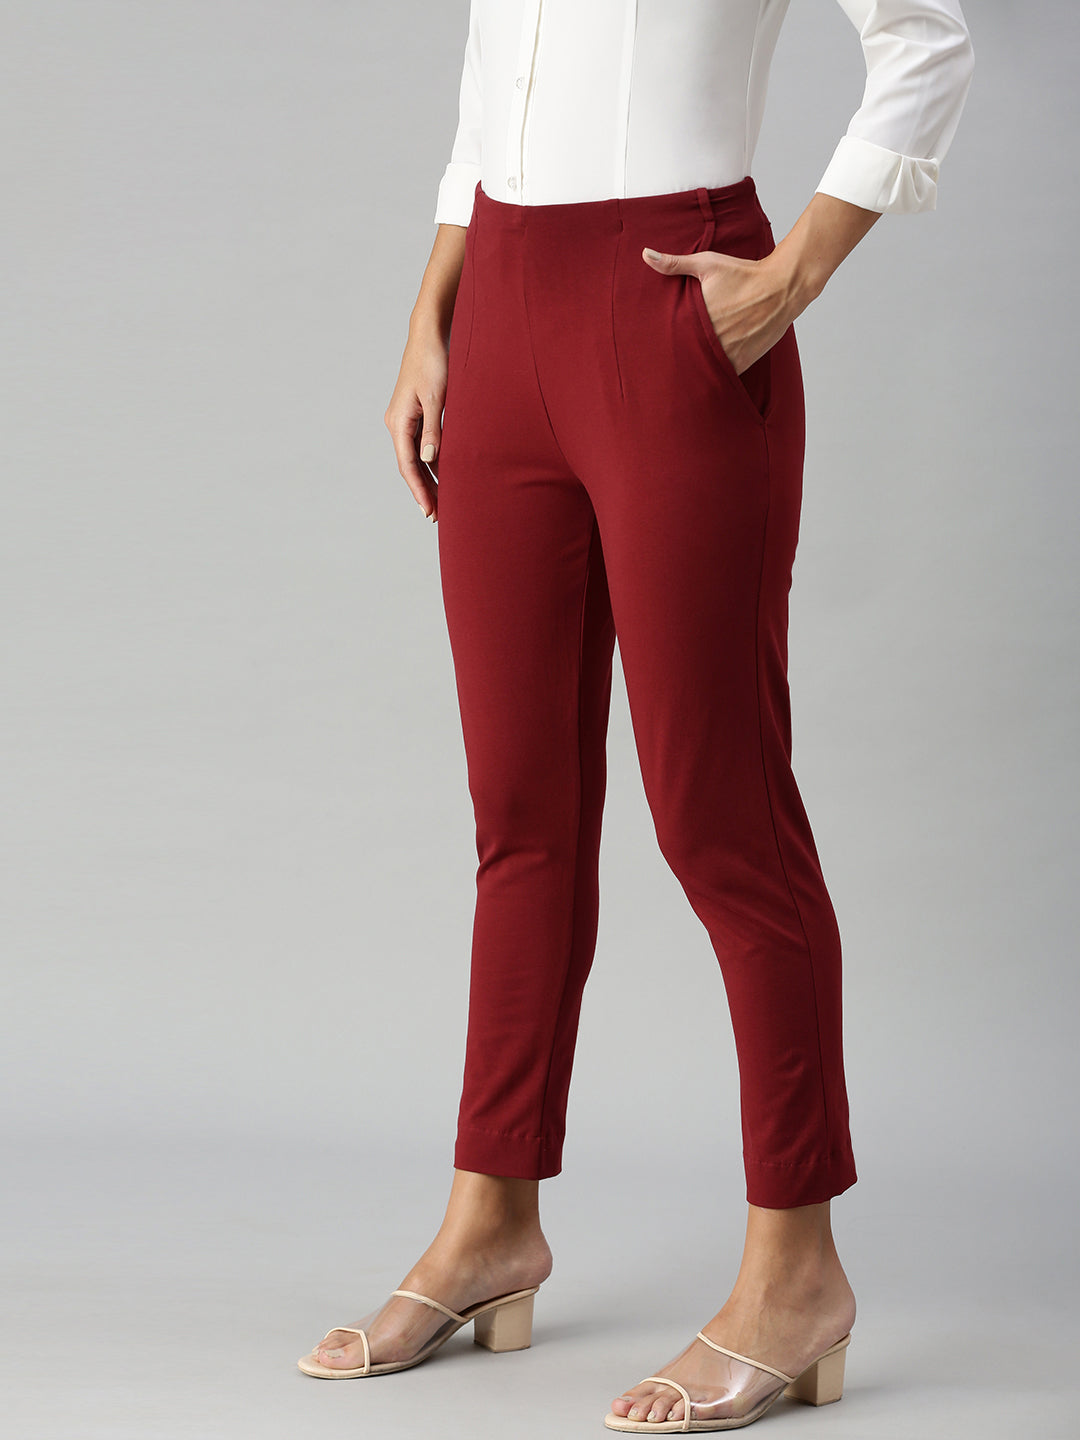 Lycra Cigarette Pants at Rs.285/Piece in hyderabad offer by vivika